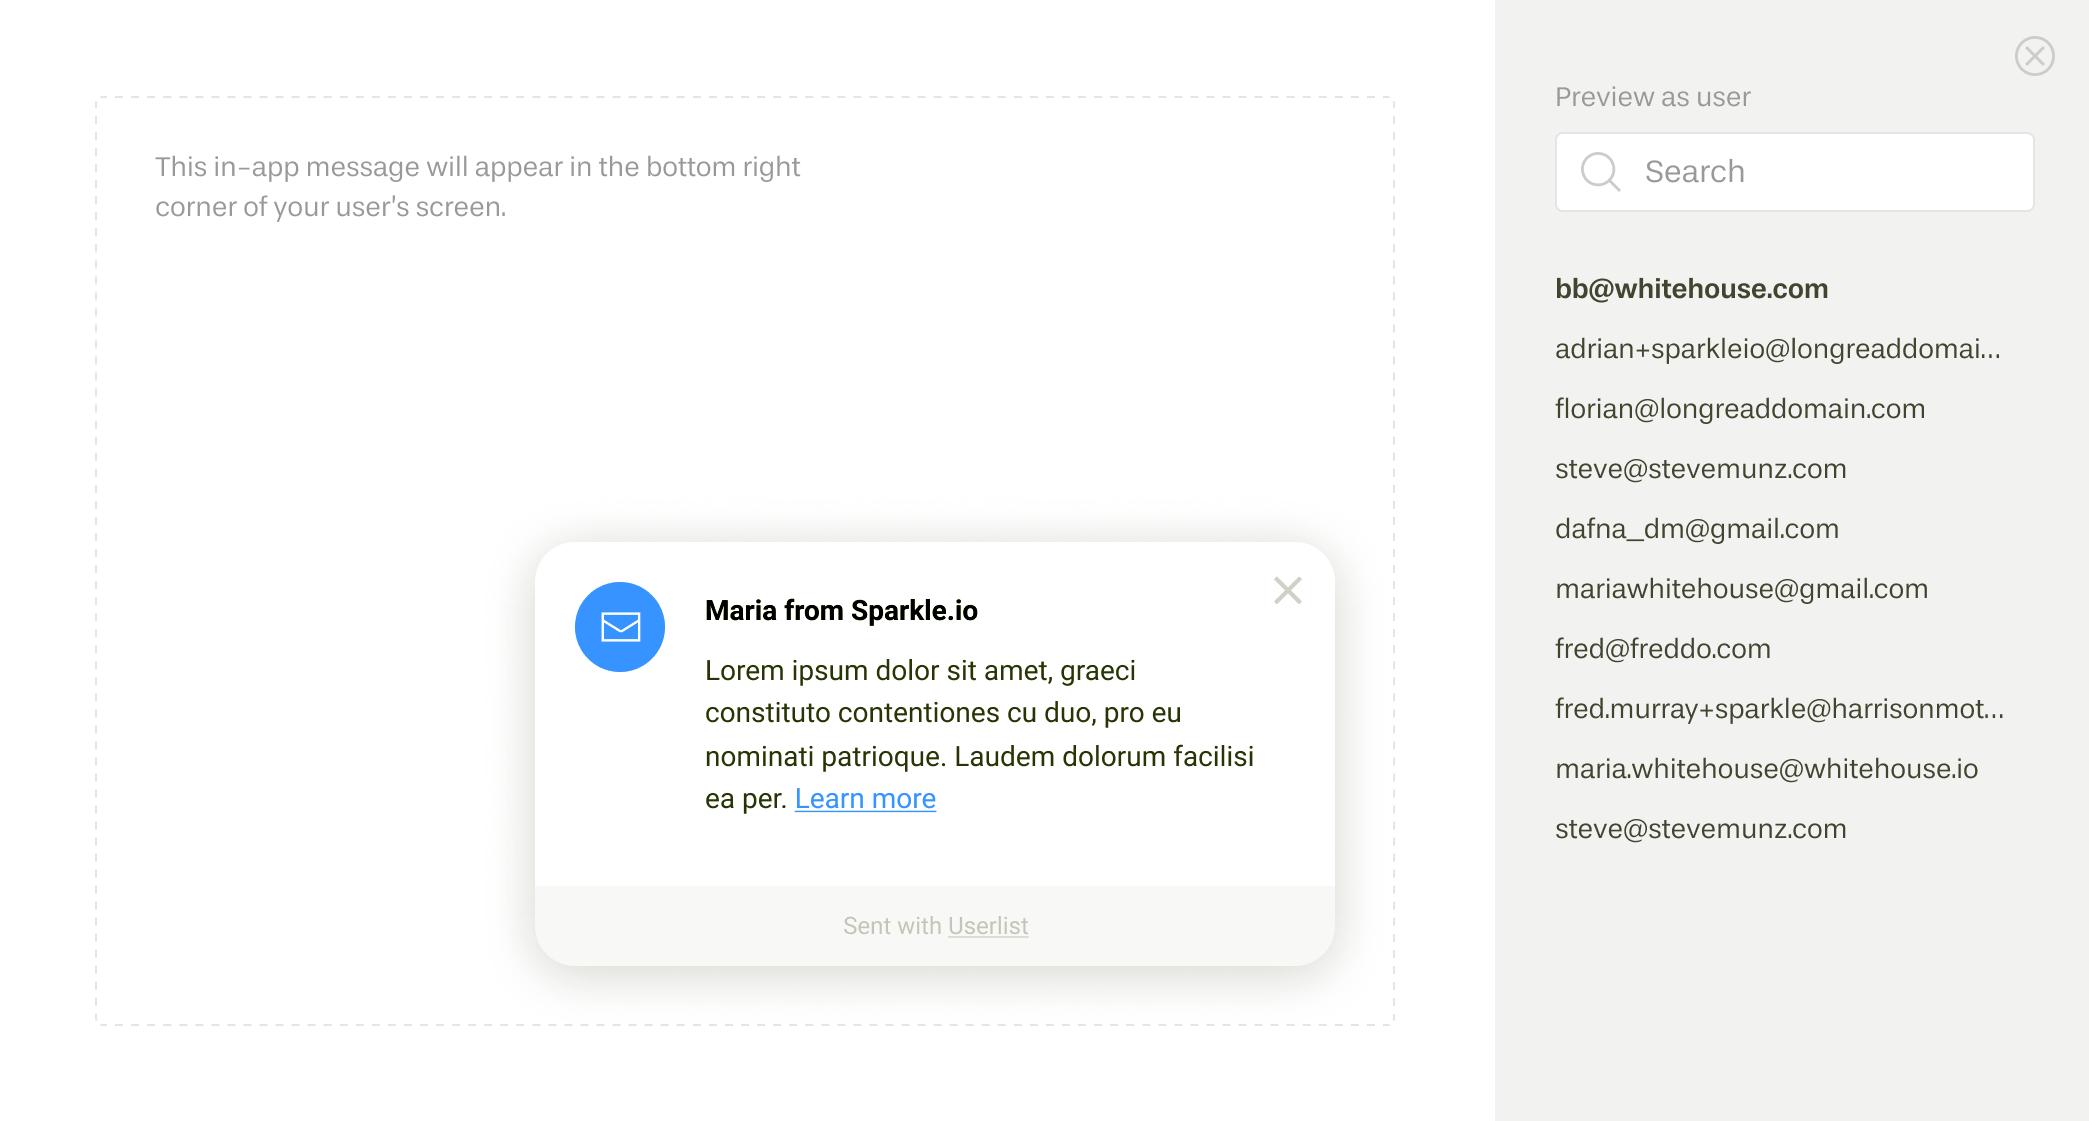 Screenshot of how to preview in-app messages on Userlist